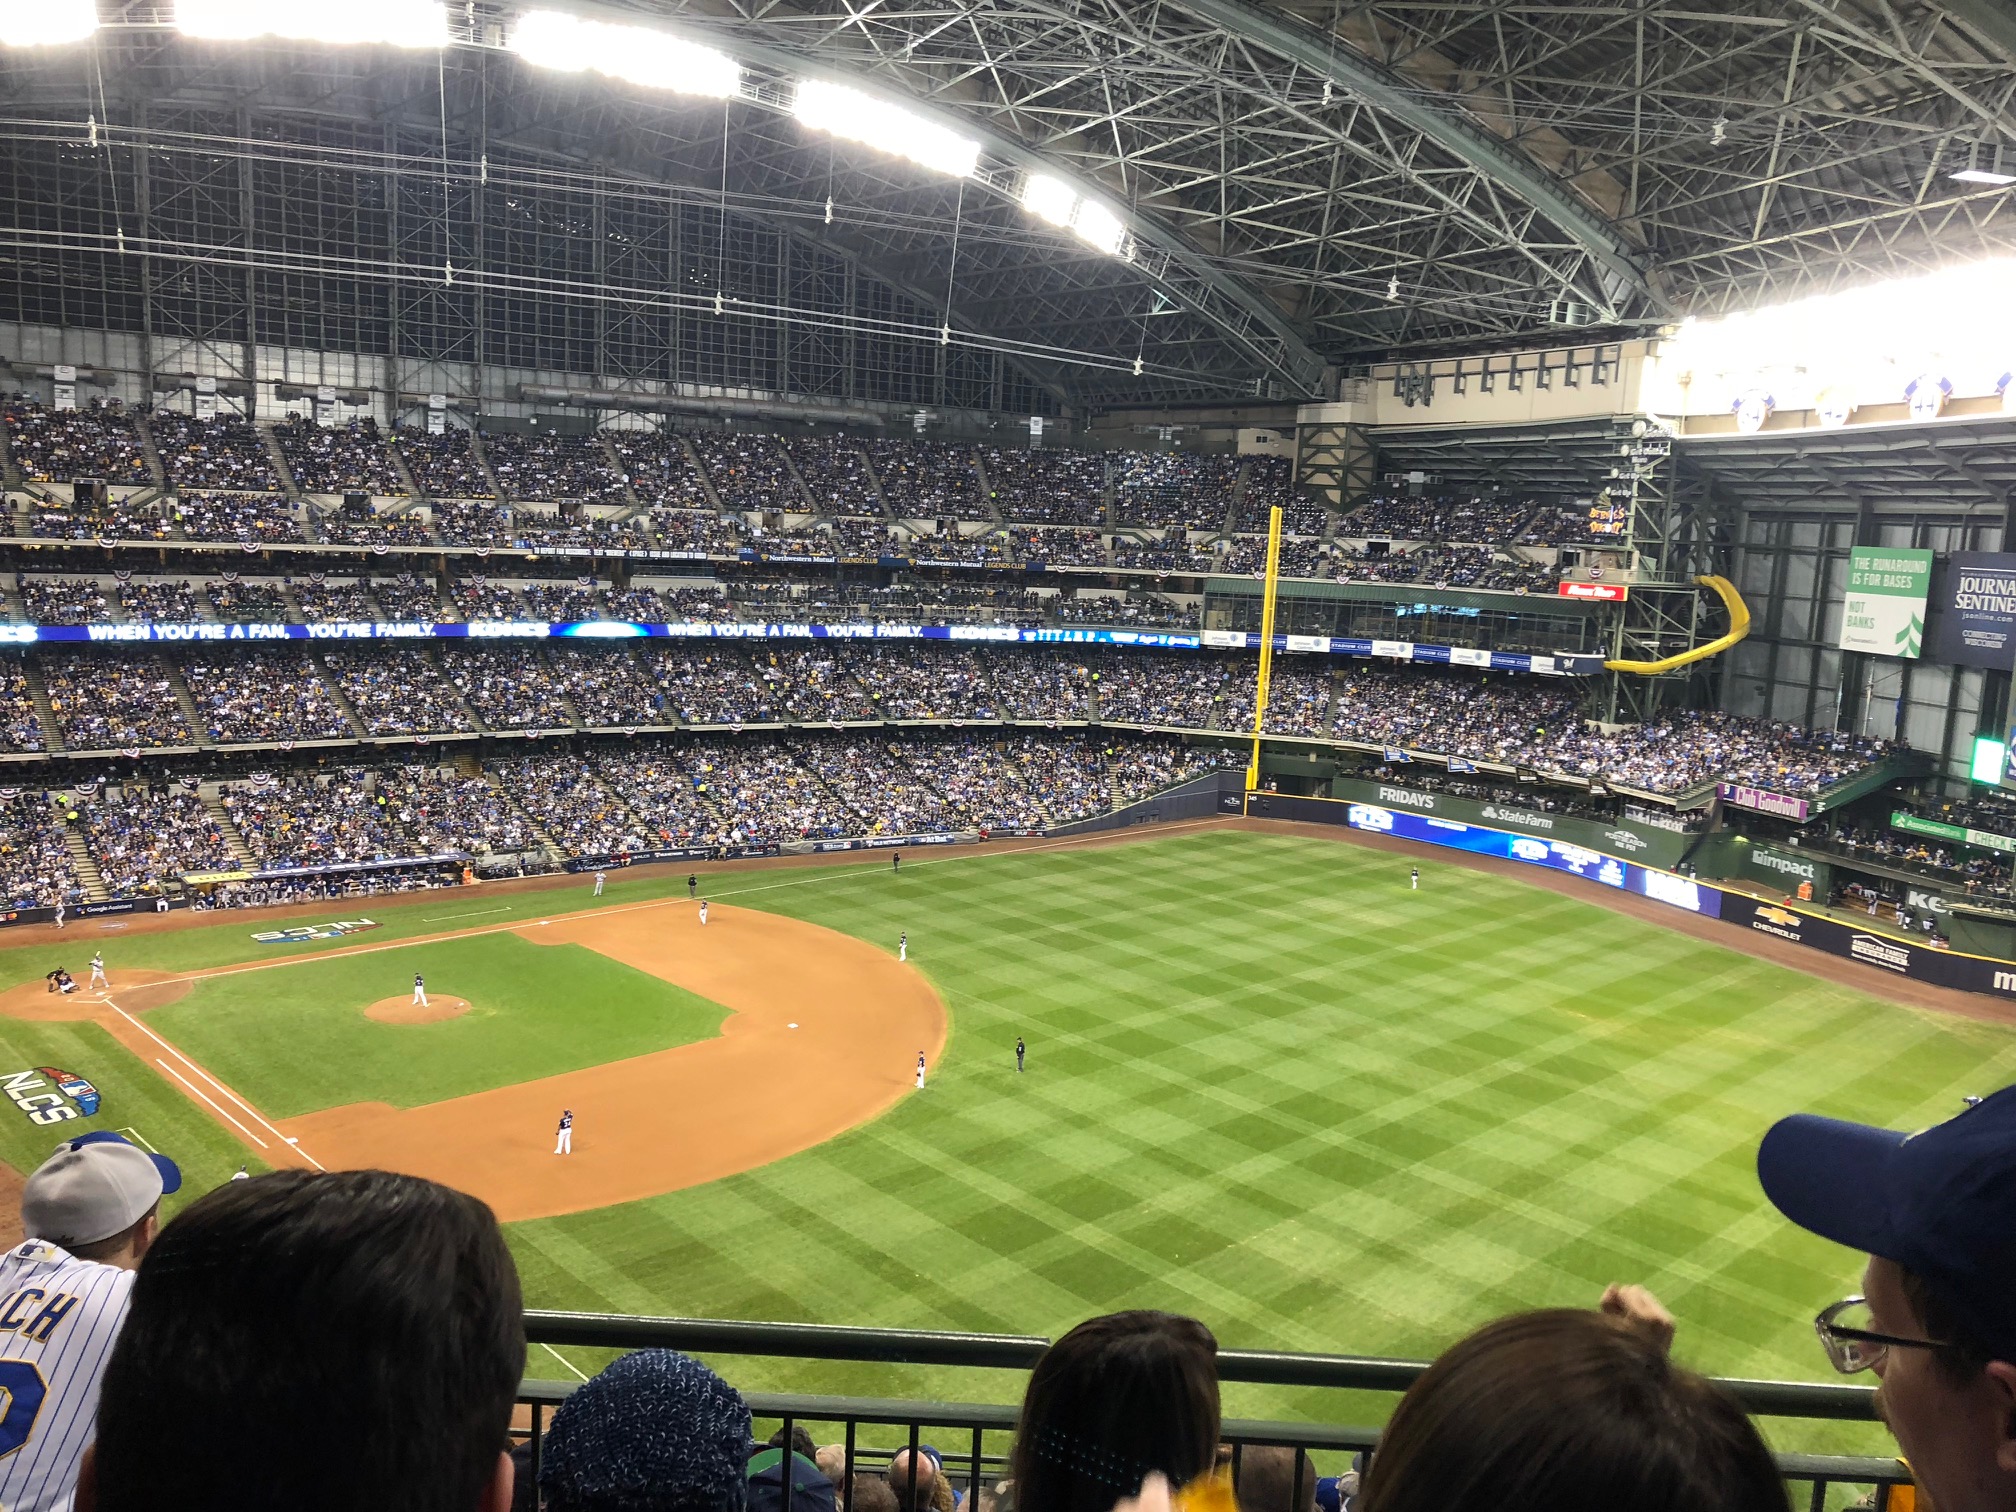 A sold out crowd at Miller Park on Friday, October 12th when the Milwaukee Brewers beat the Los Angeles Dodgers 6-5 in NLCS Game 1.